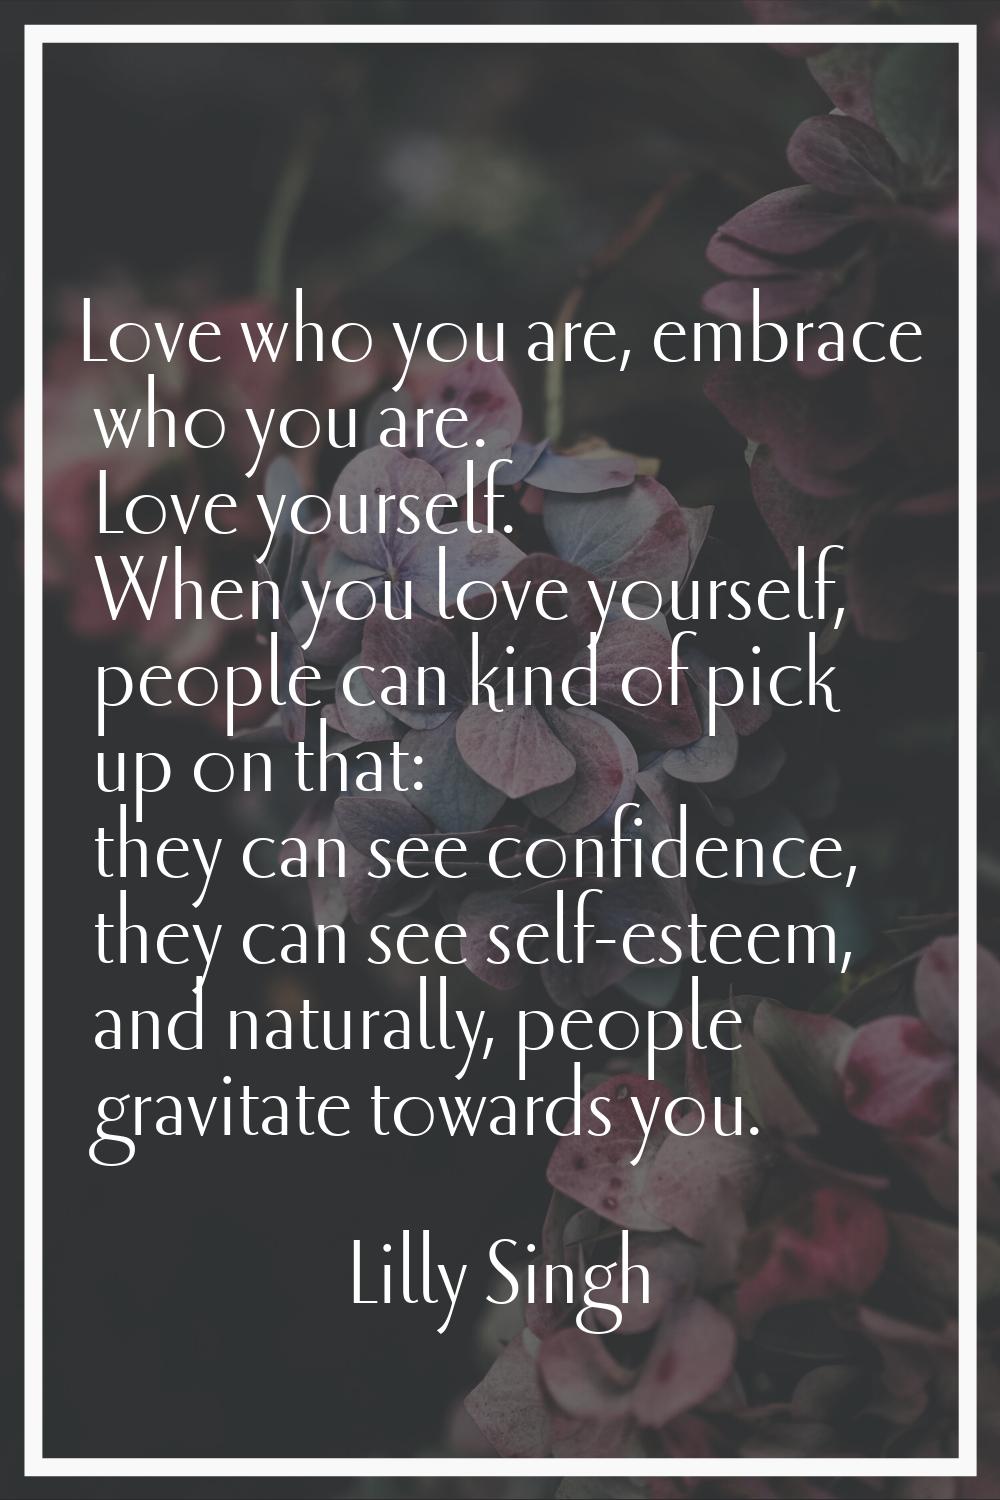 Love who you are, embrace who you are. Love yourself. When you love yourself, people can kind of pi